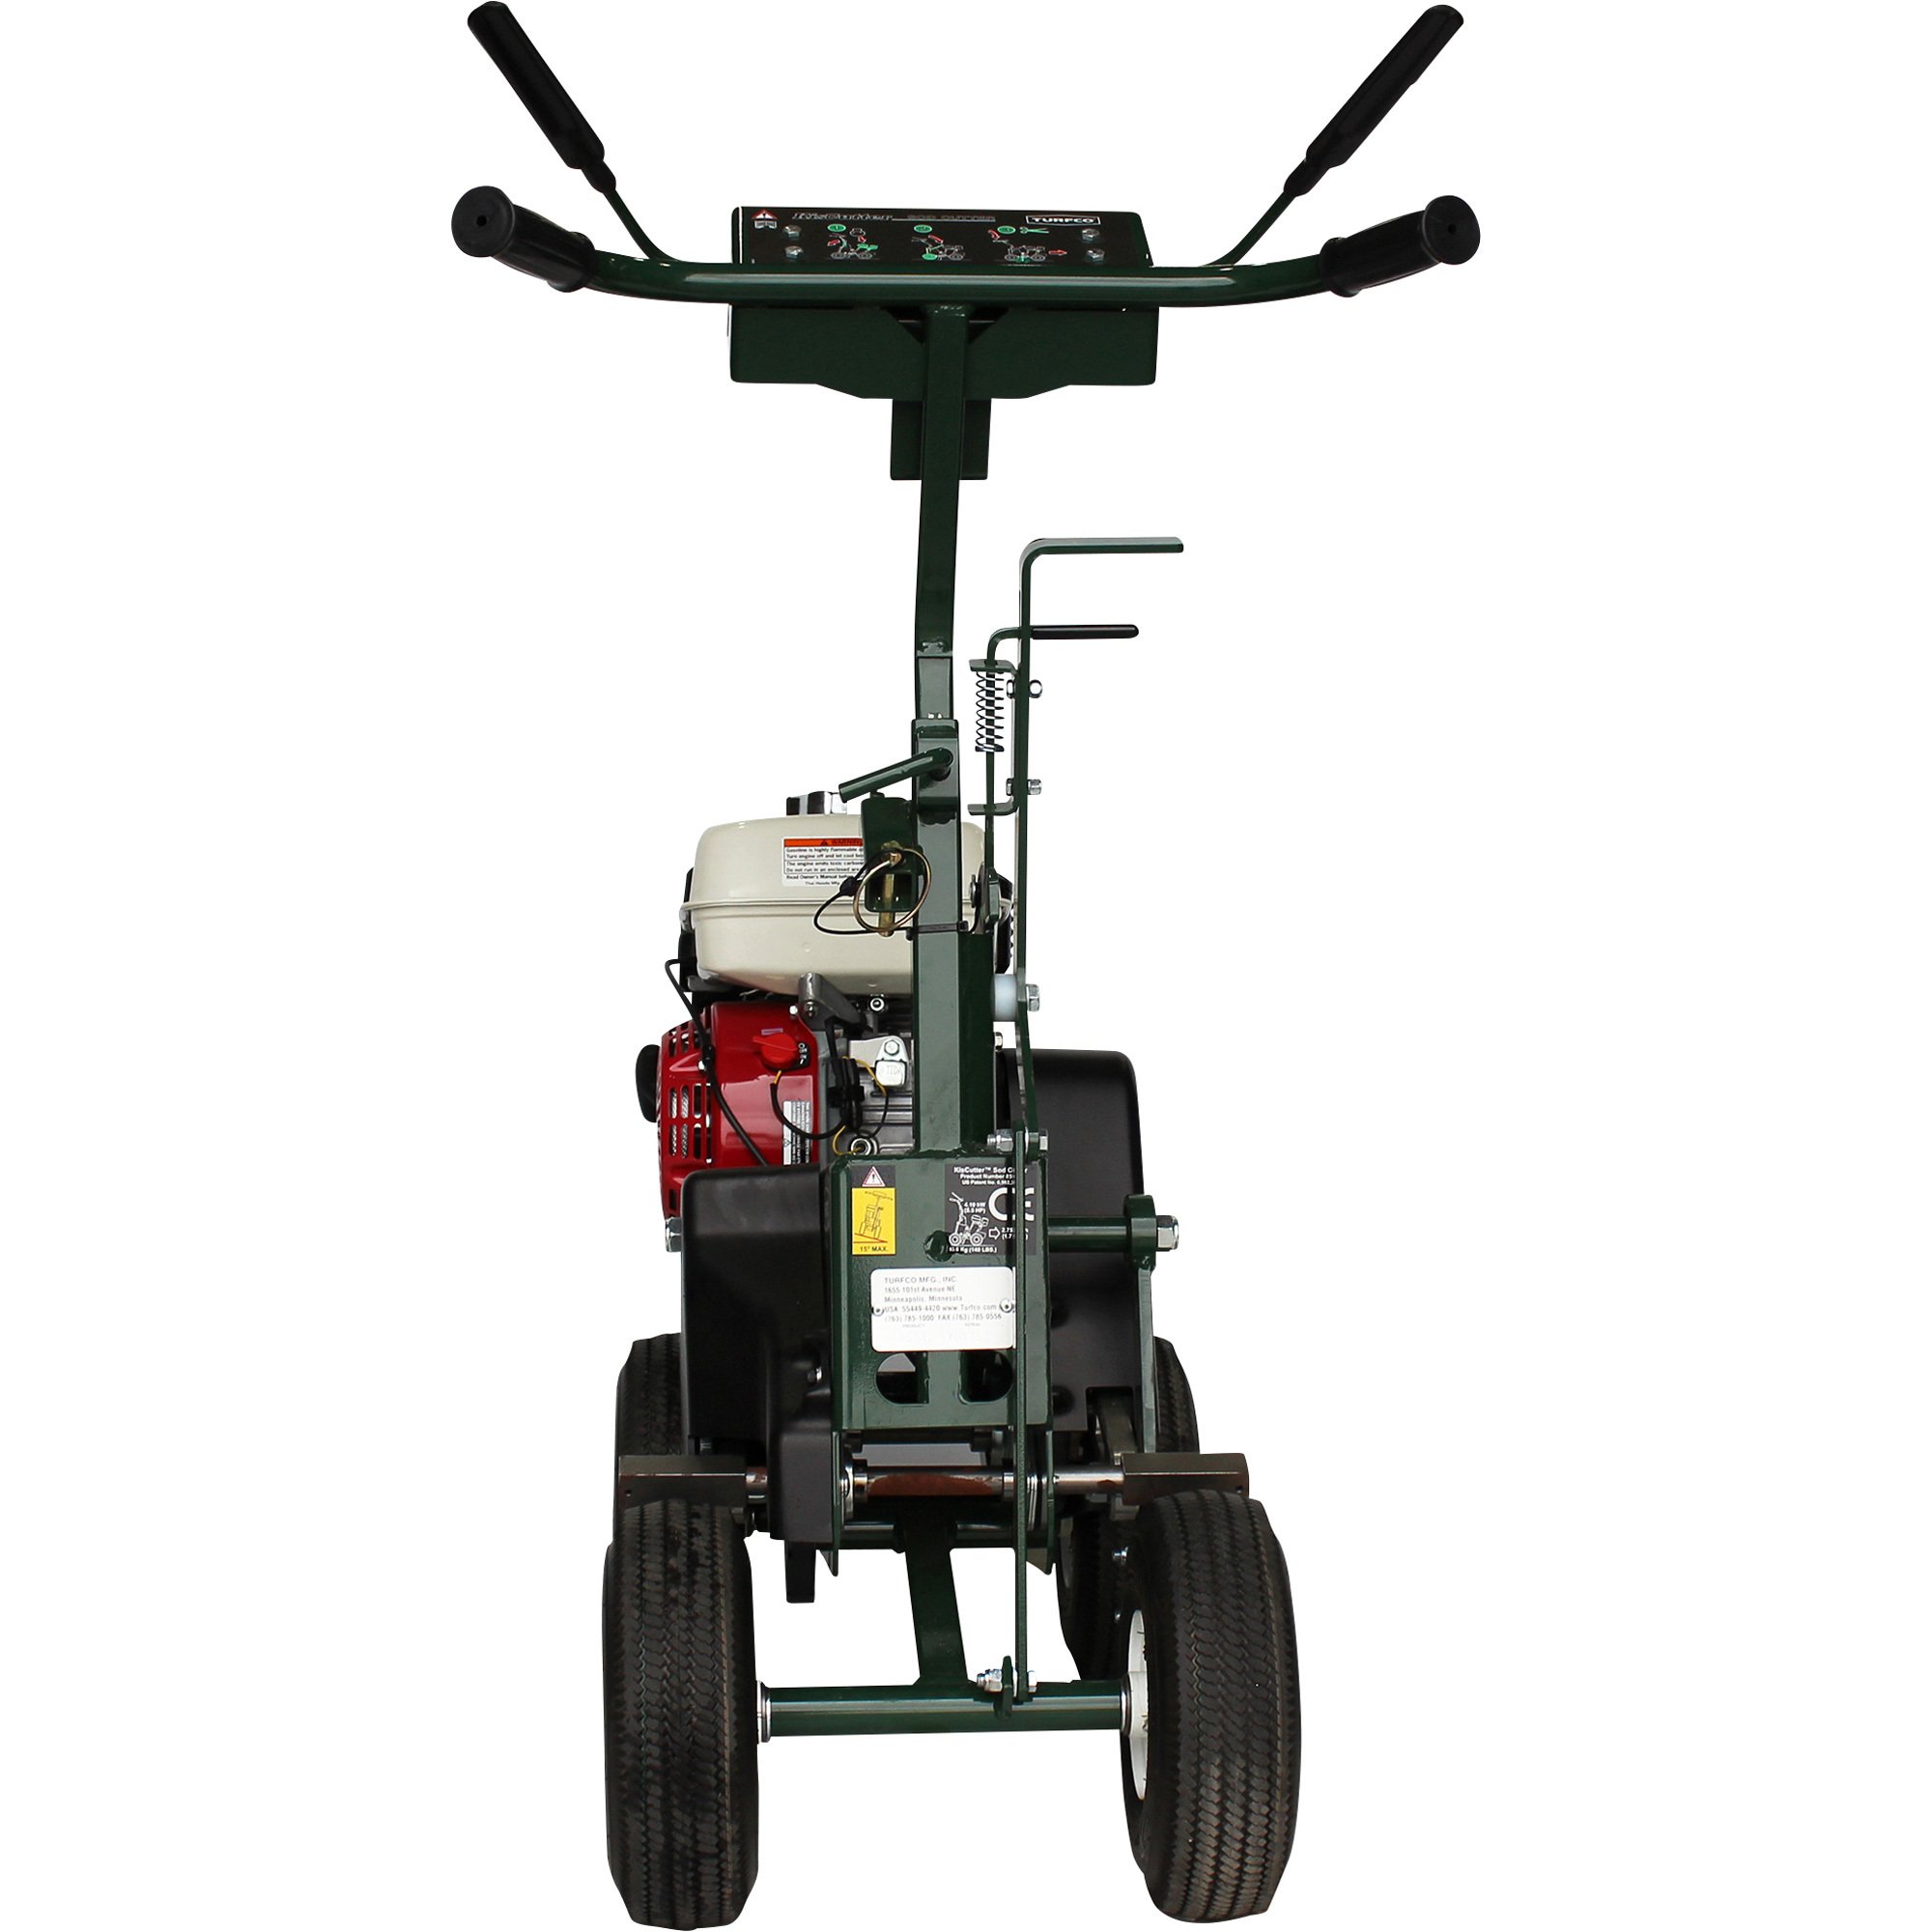 Professional Landscaping Edgers & Sodcutters - KisCutter Sod Cutter - Turfco